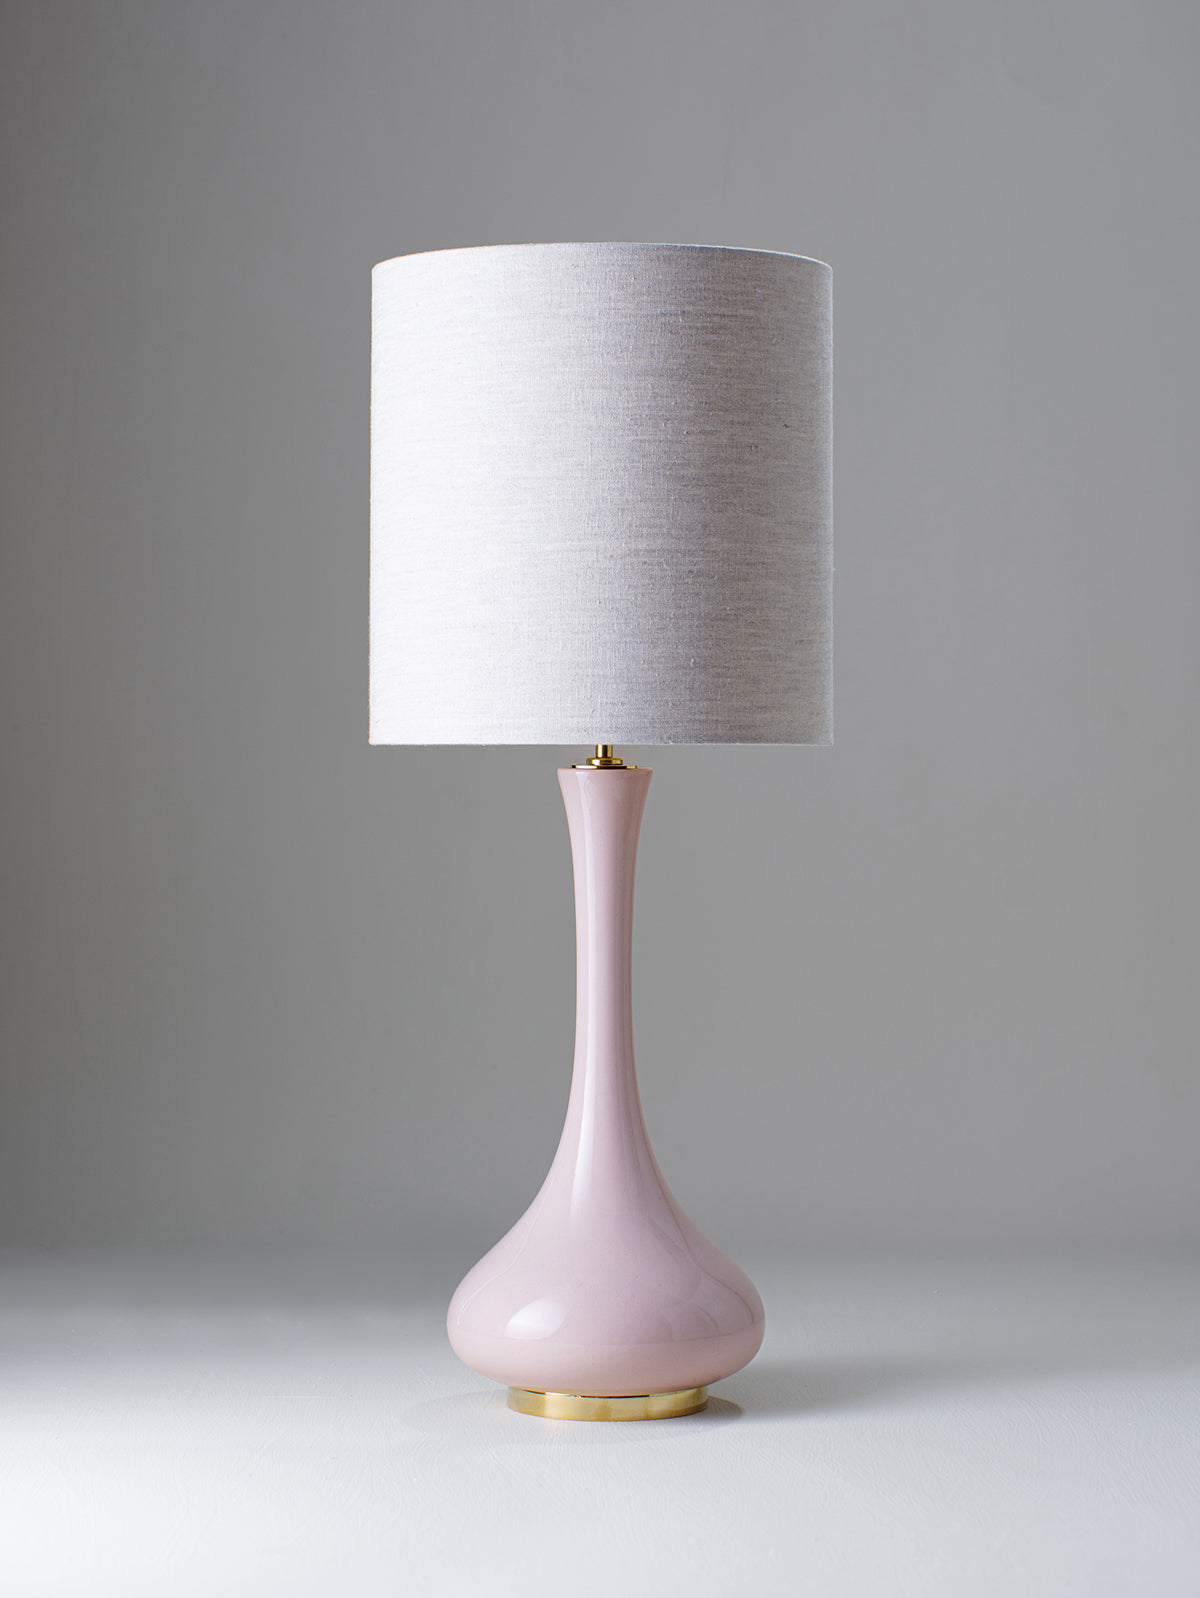 Dusty Pink shown with 13" Top Hat in Natural Linen with Cream Card lining